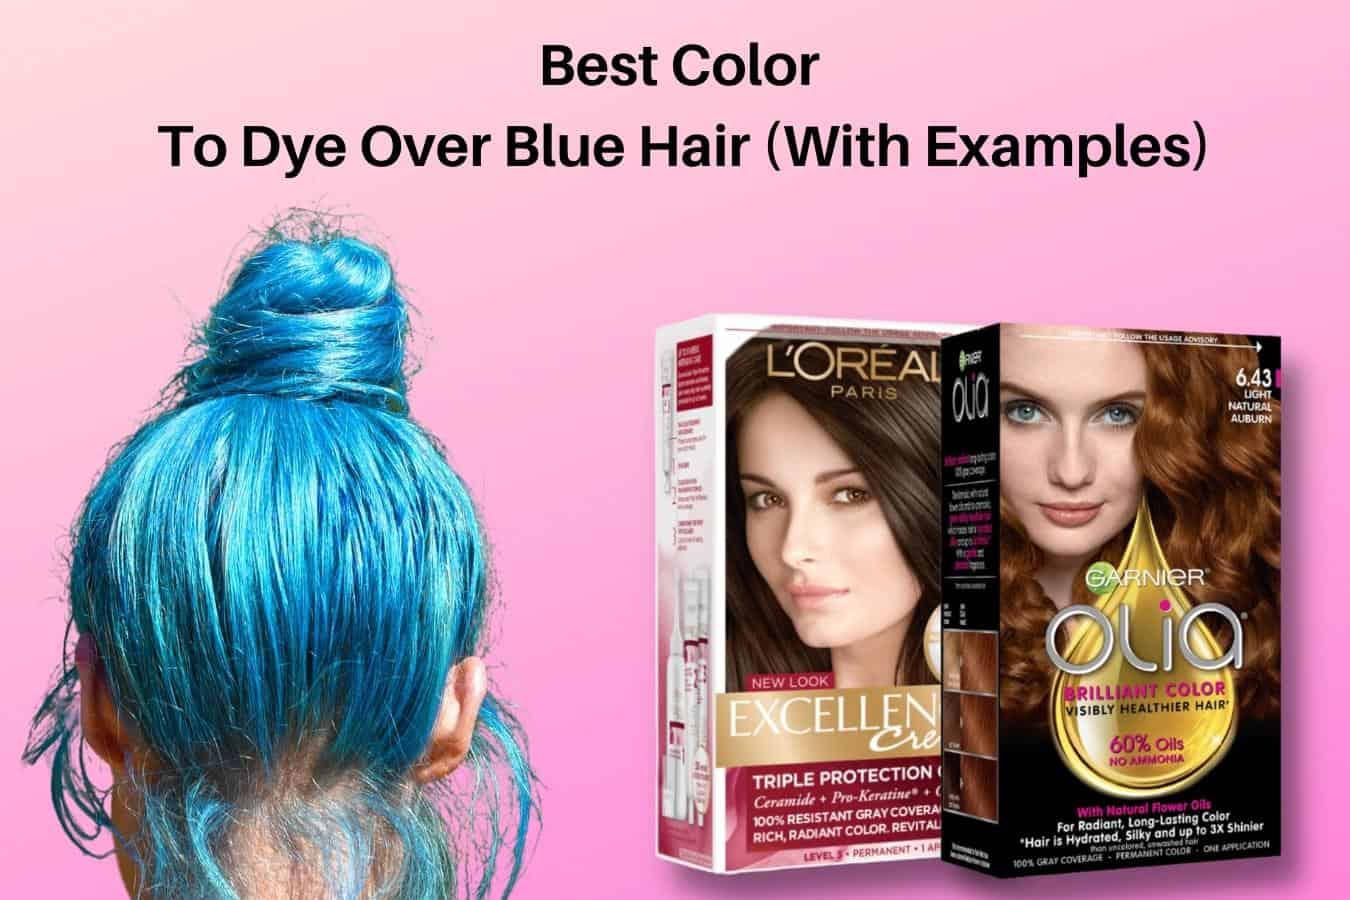 Best Color To Dye Over Blue Hair (With Examples)